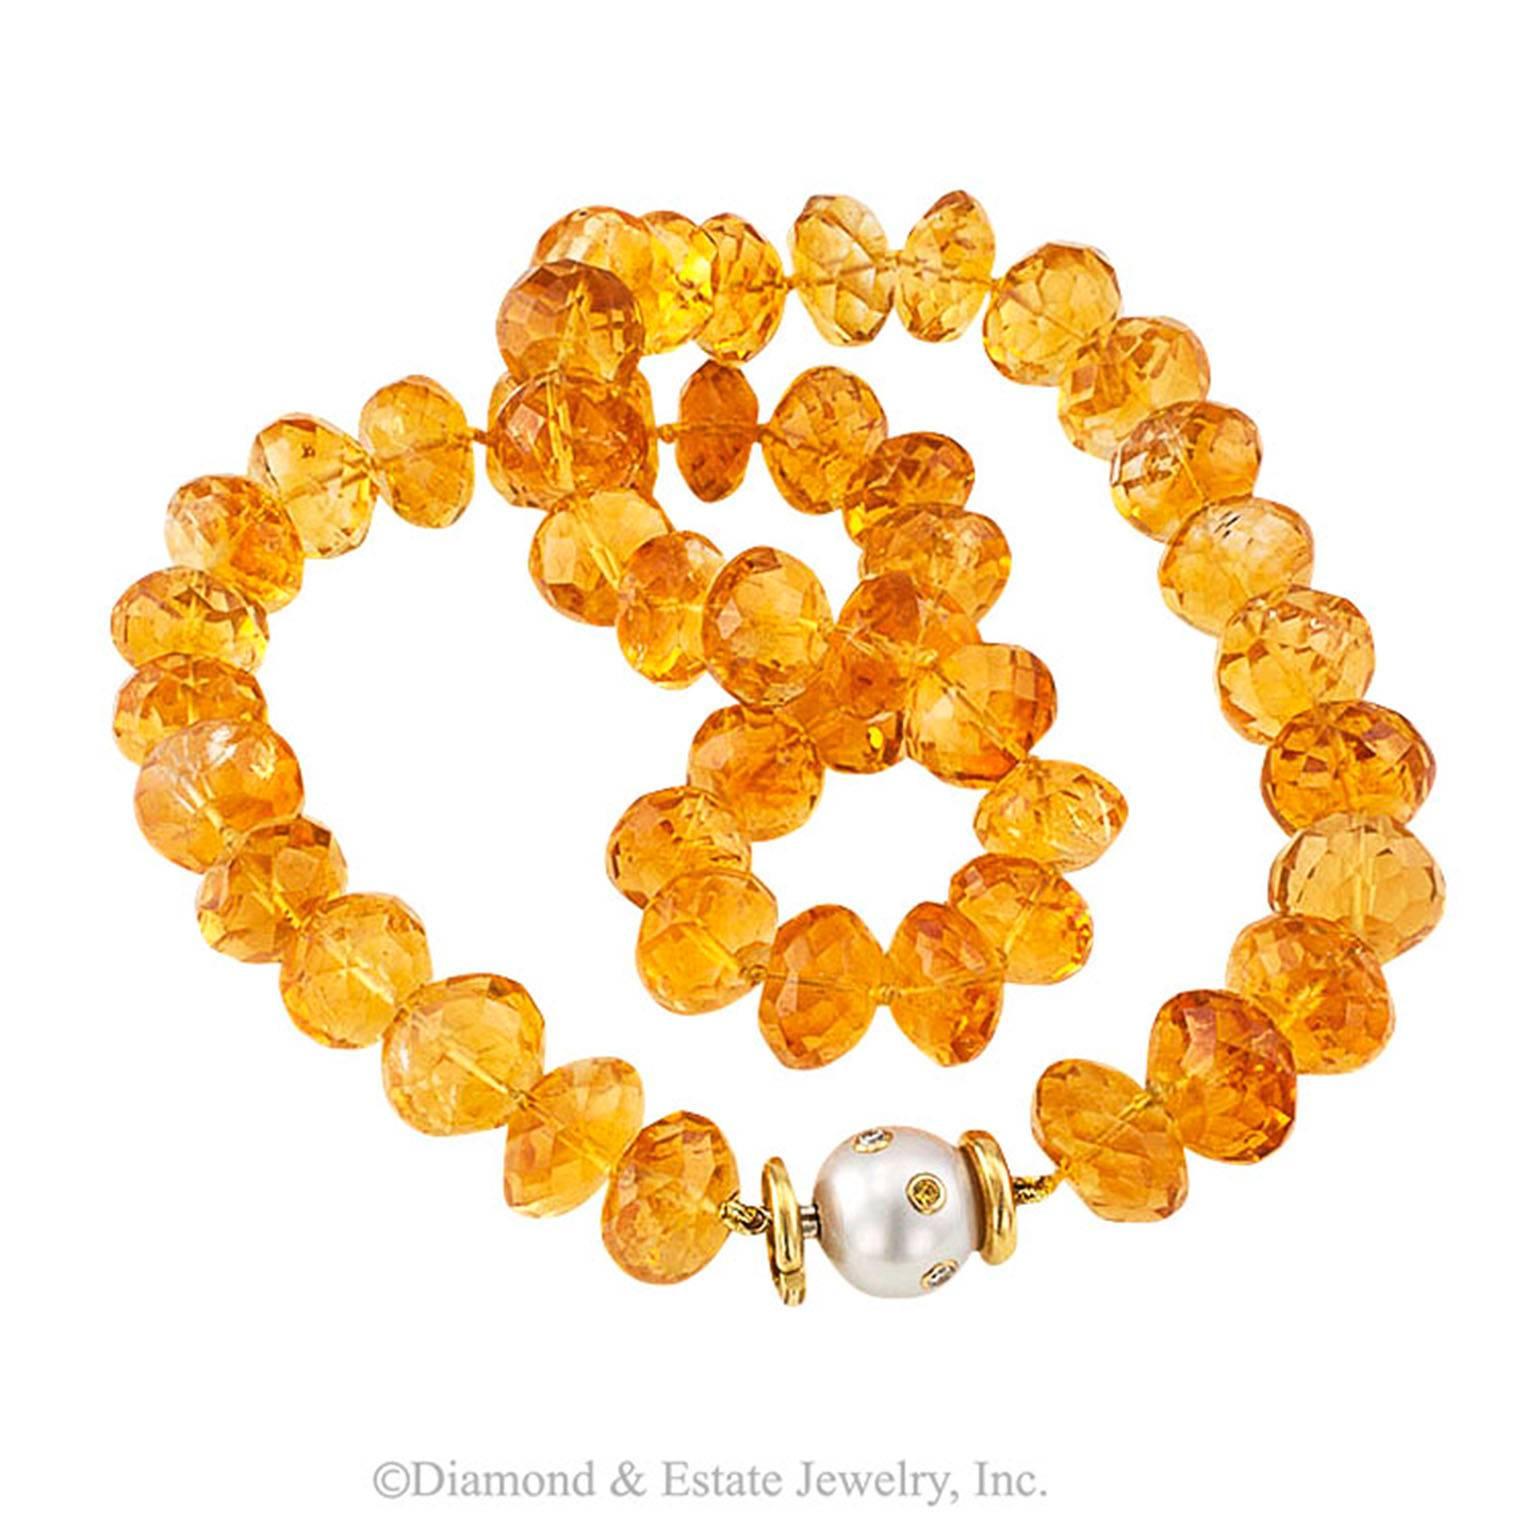 Seaman Schepps Faceted Citrine Bead Necklace

Composed as a single strand of faceted Citrine beads weighing approximately 410.00 carats total, that sparkle like crystallized sunshine, completed by an 18 karat yellow gold clasp comprising a 12 mm